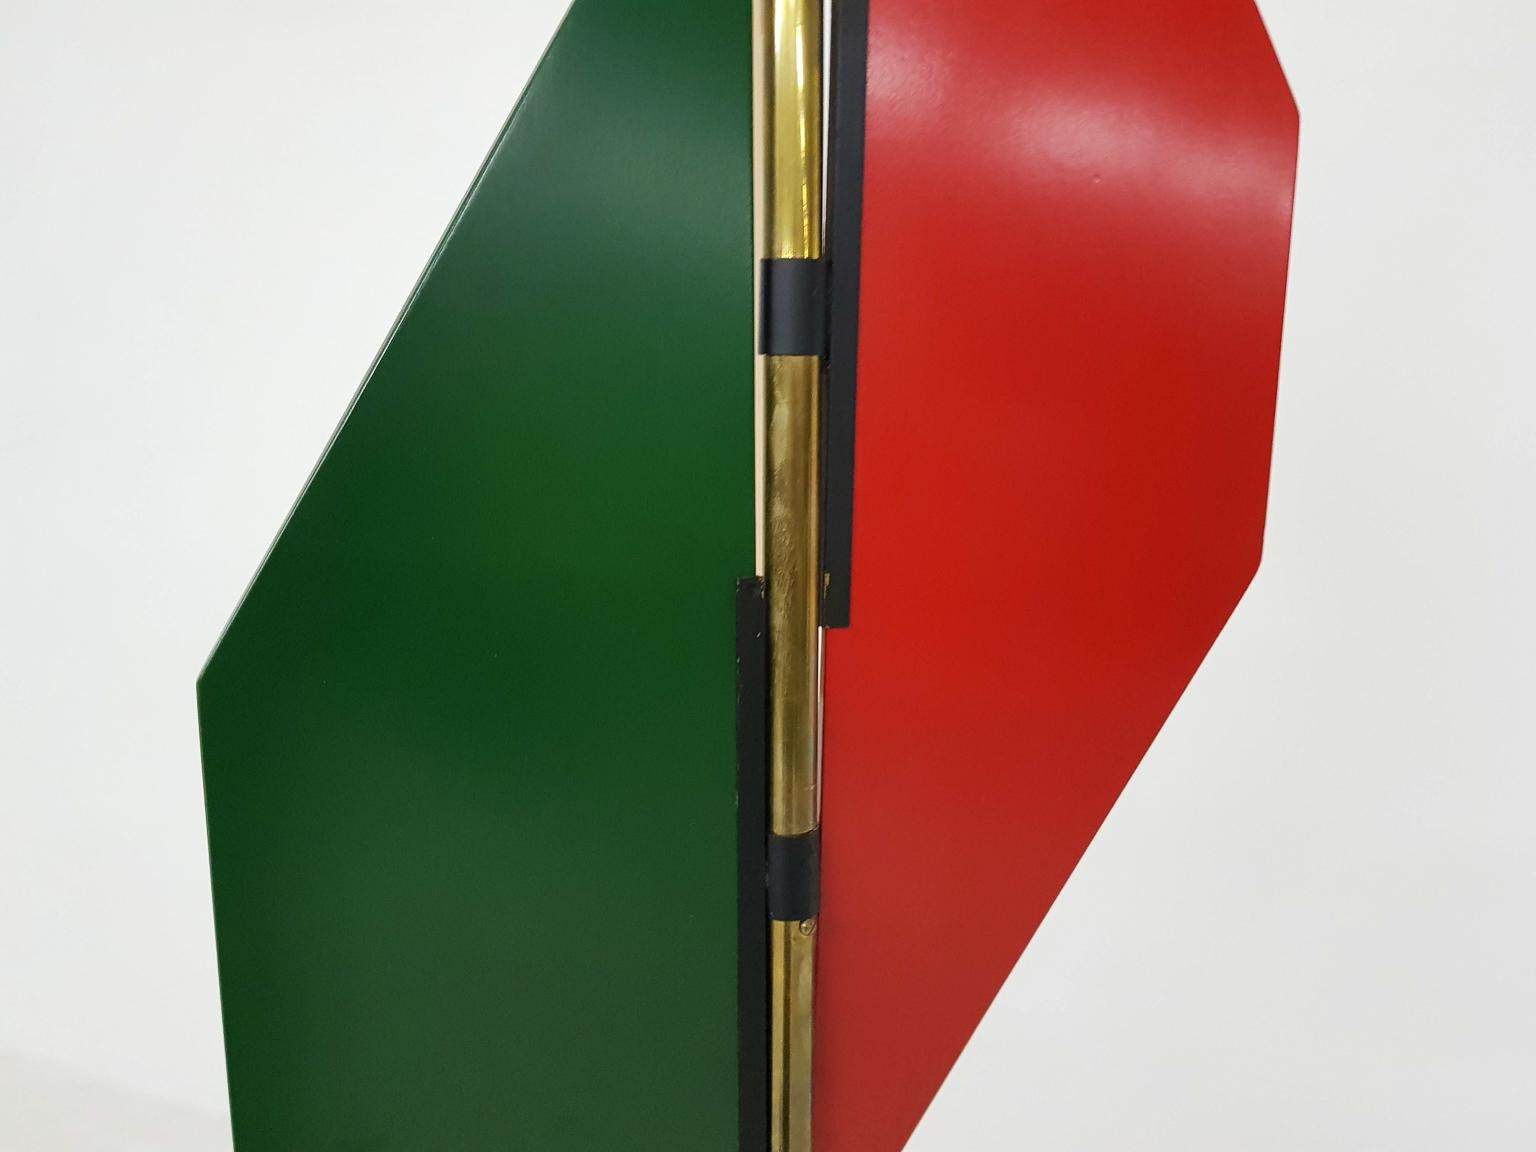 Exceptional Colorful Italian Midcentury Floor Light Attributed to Arredoluce For Sale 7